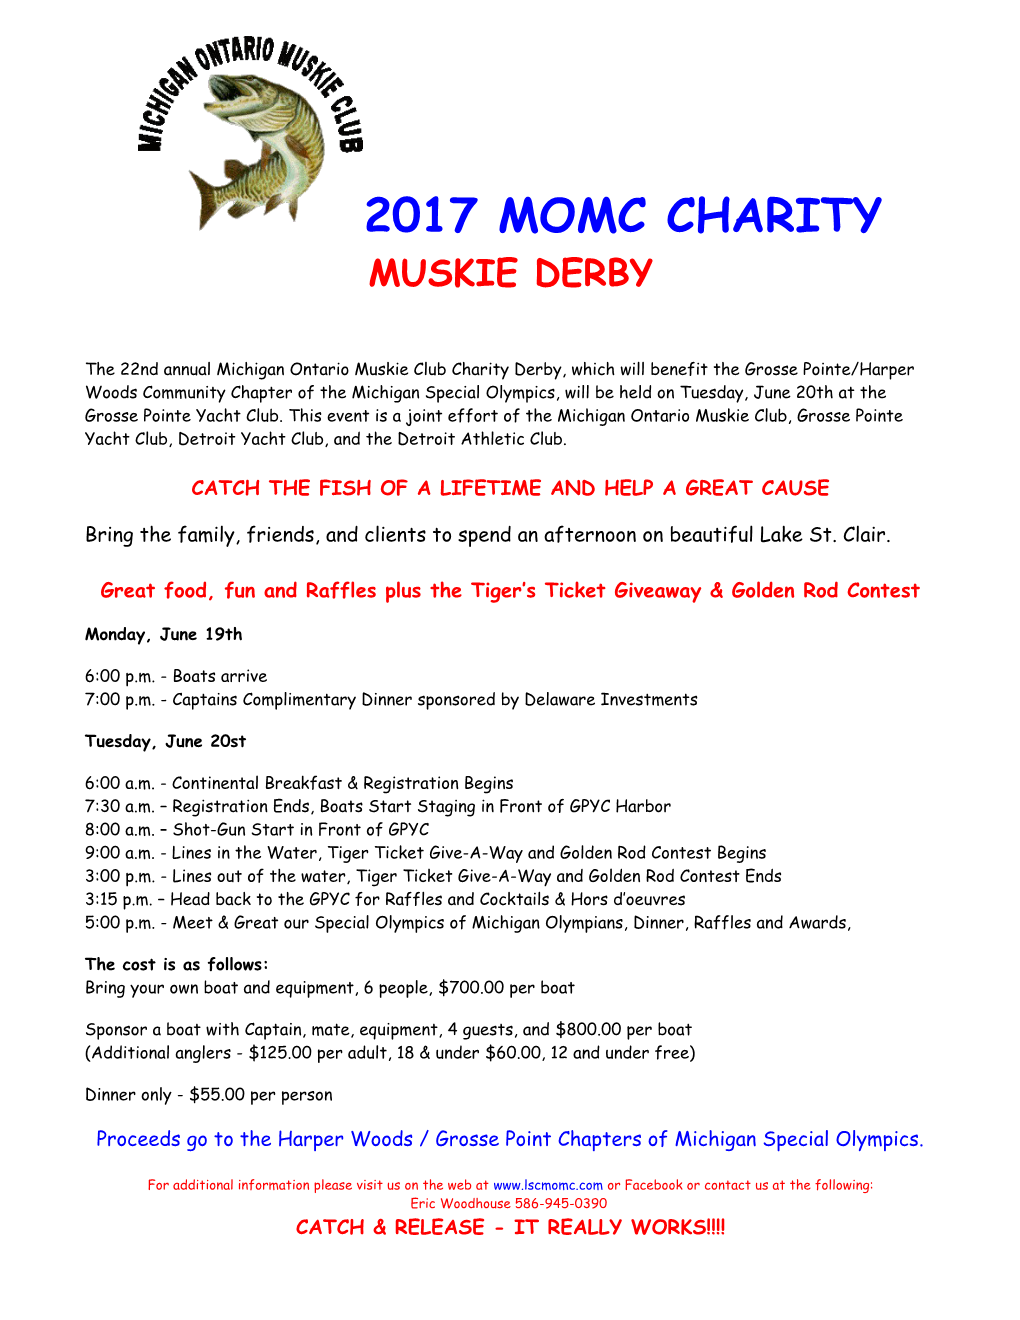 Catch the Fish of a Lifetime and Help a Great Cause